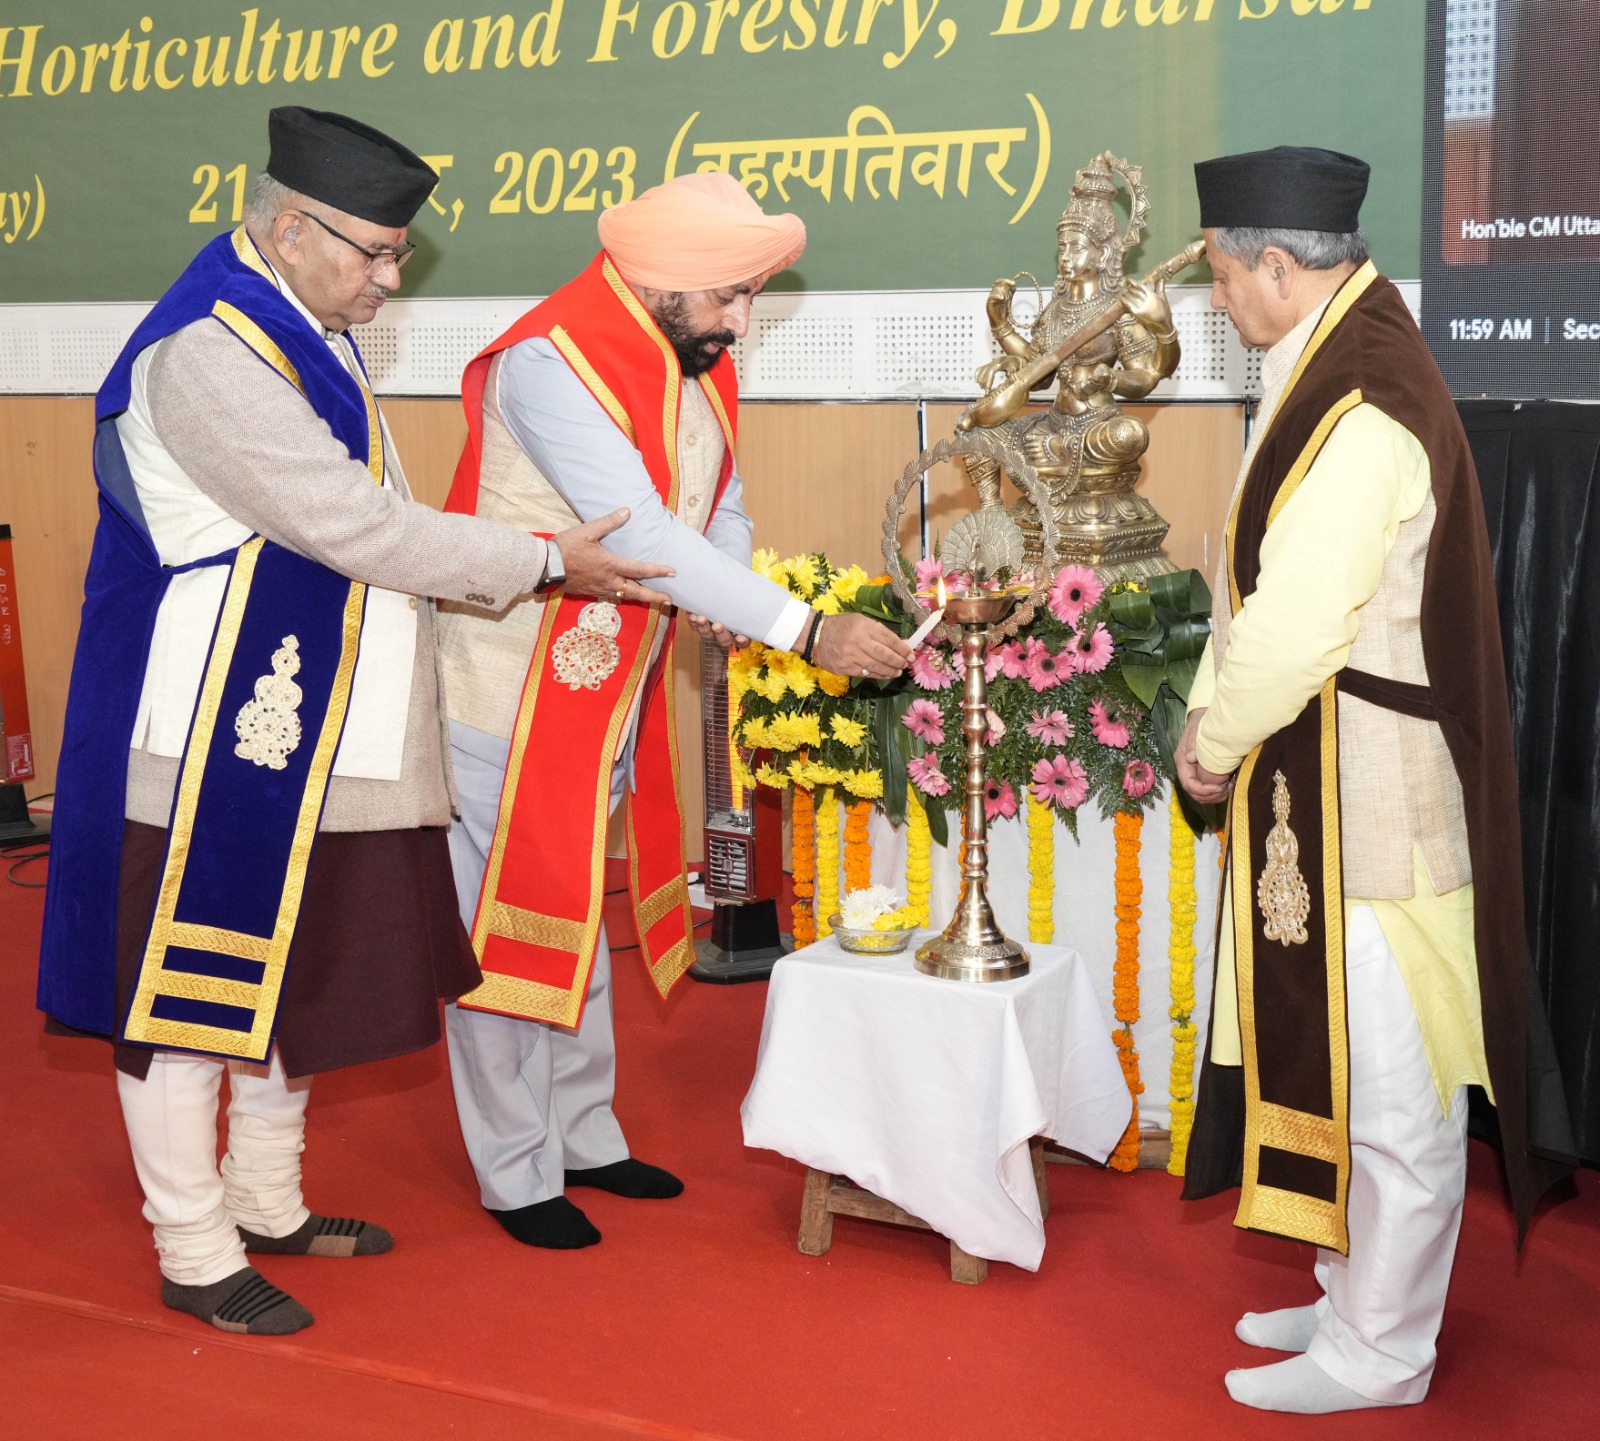 ﻿ Governor awarded degrees to students at the convocation ceremony of Horticulture and Forestry University, Bharsar.